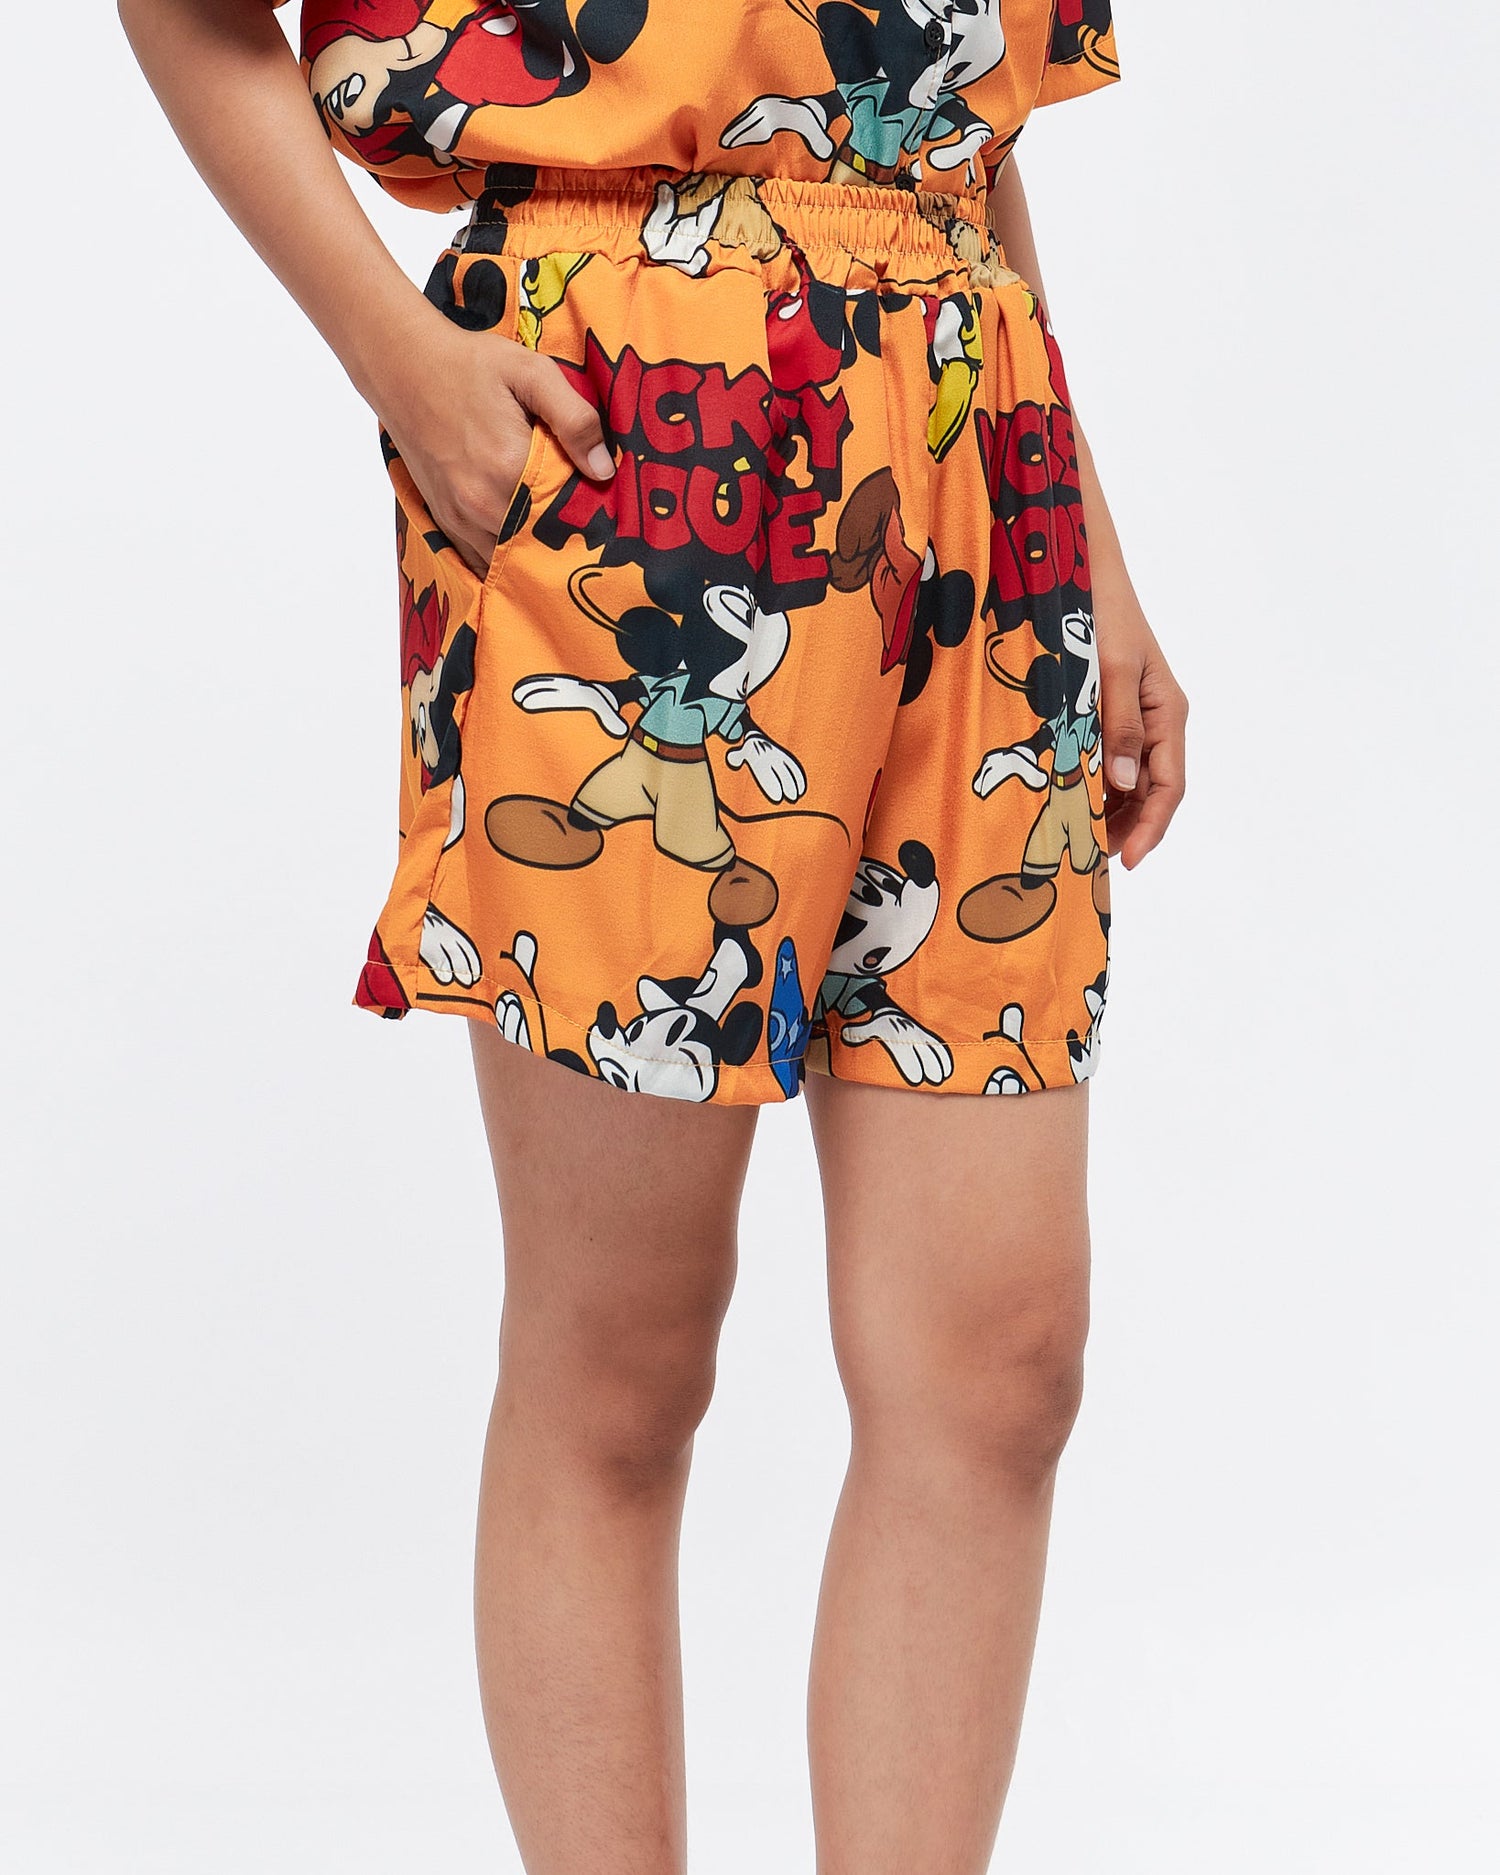 MOI OUTFIT-MickeyMouse Lady Short Pants 8.90